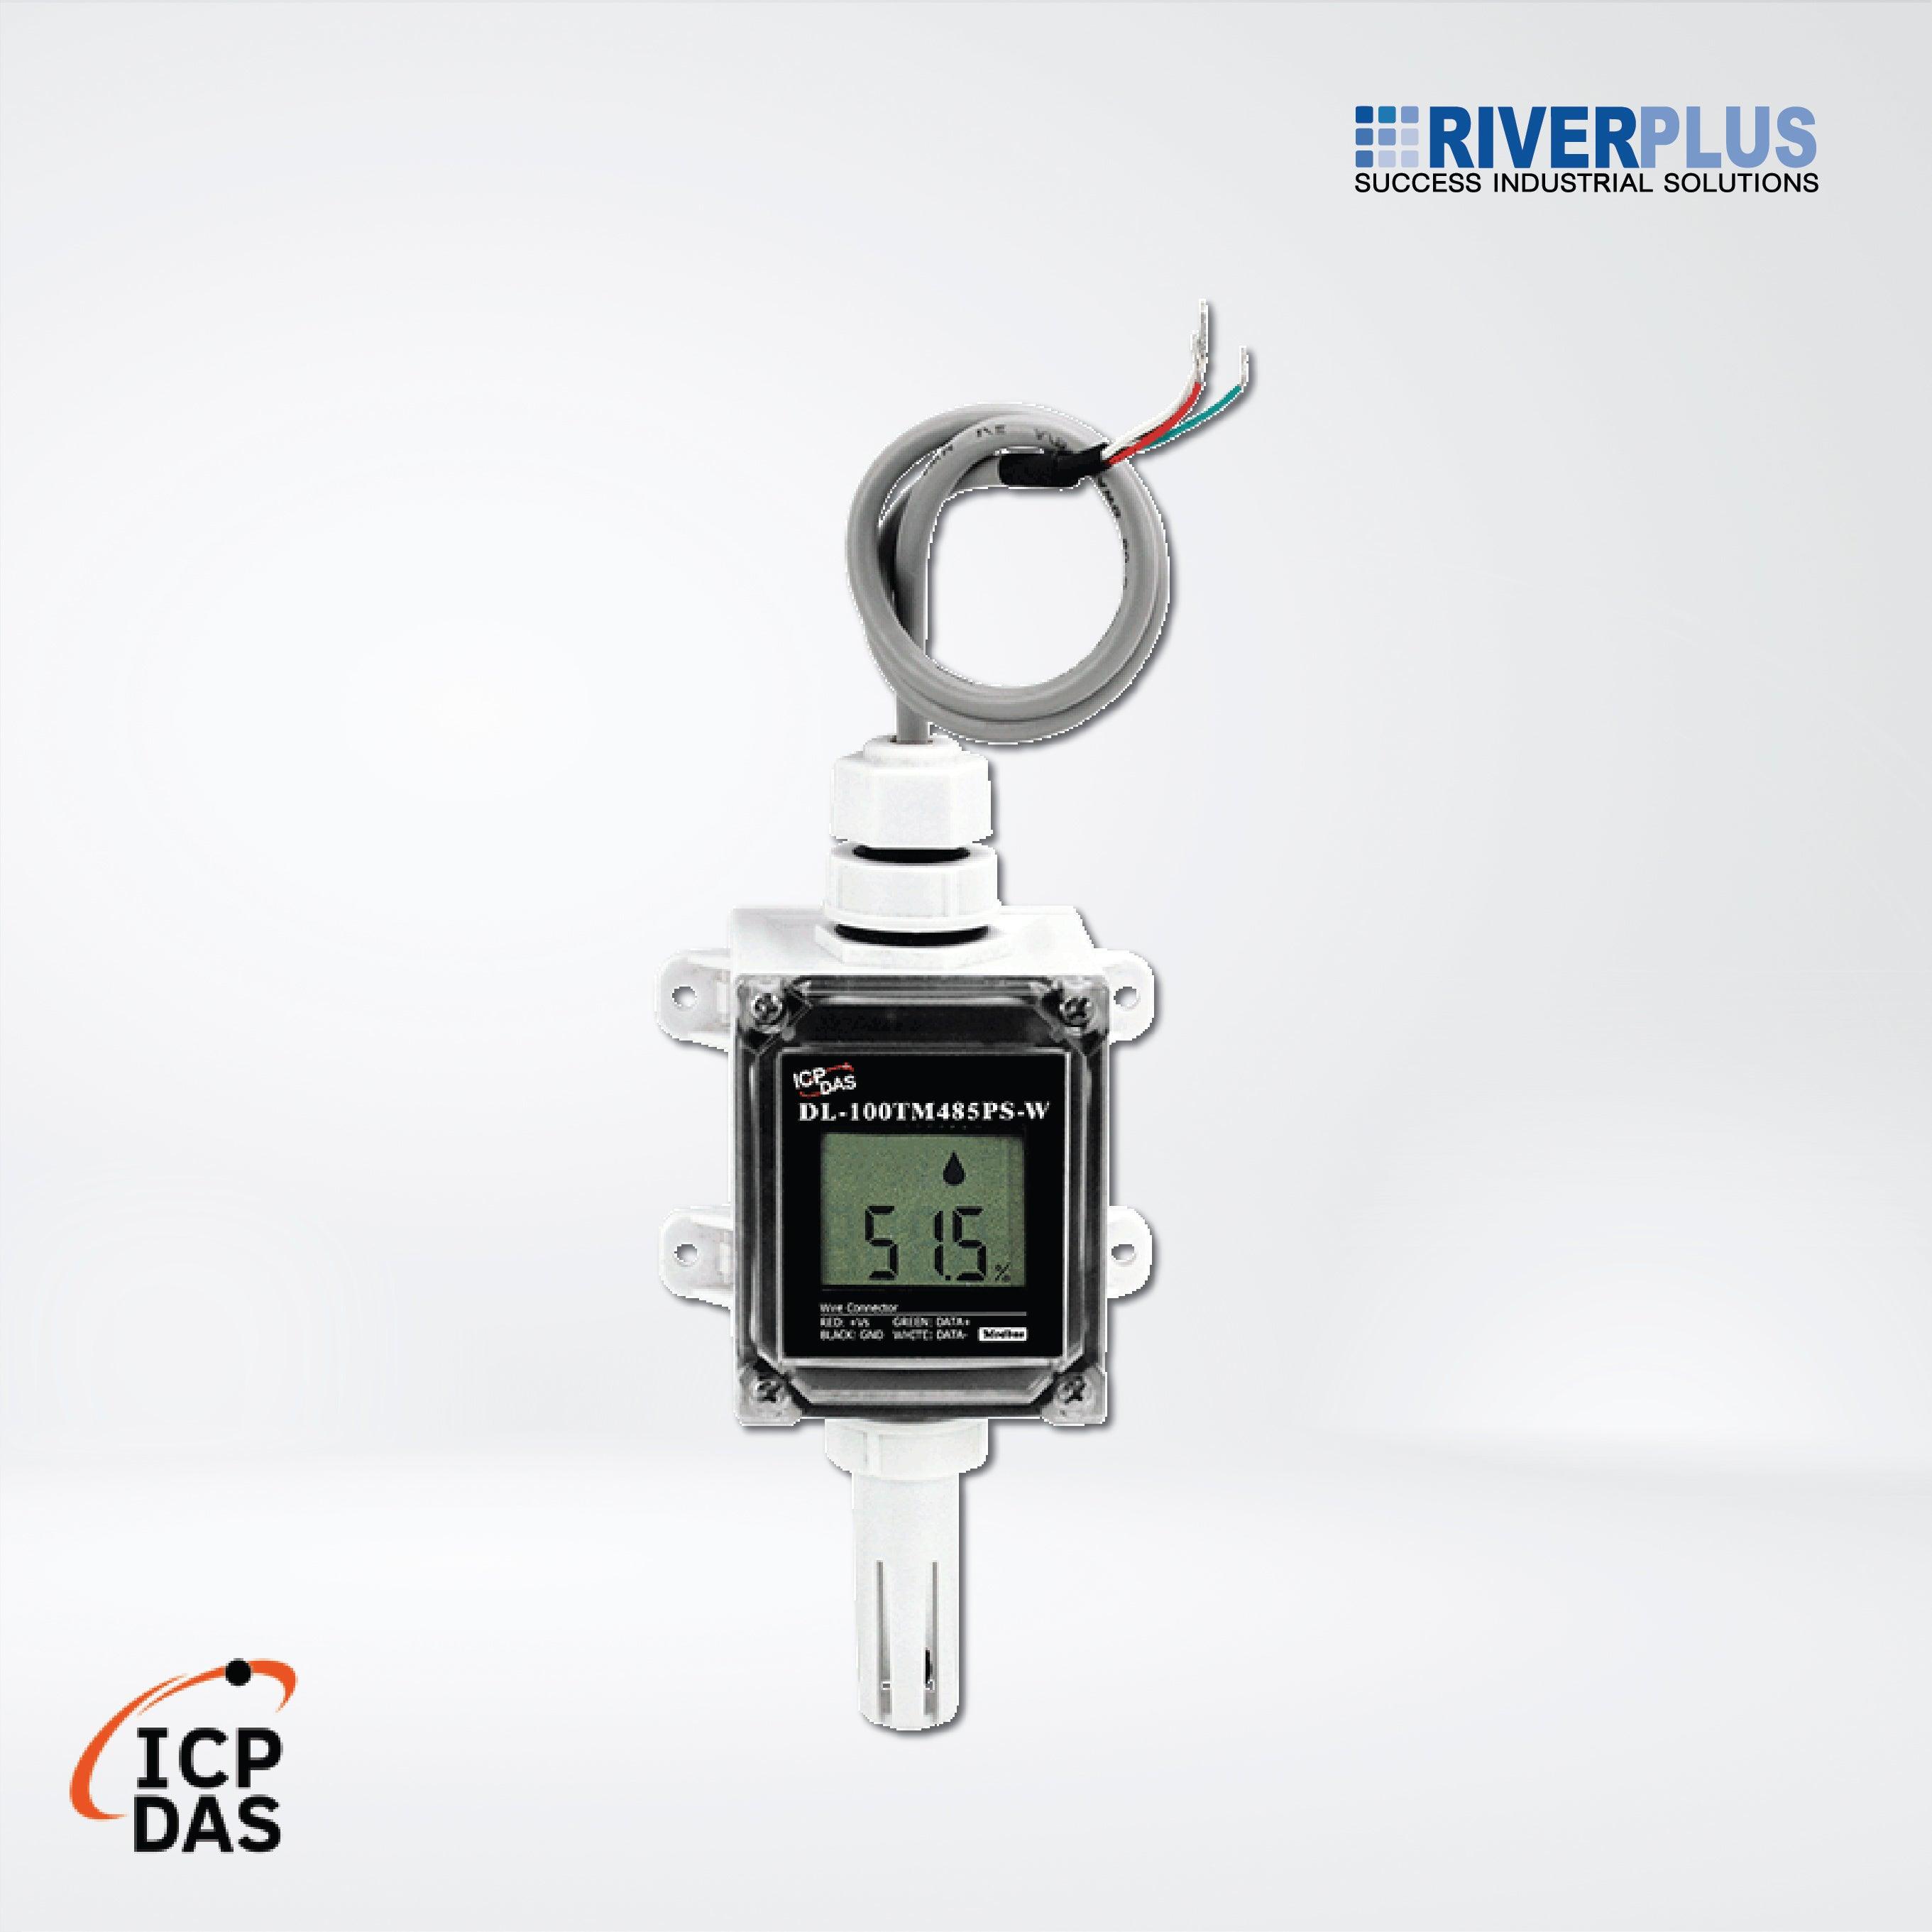 DL-100TM485PS-W IP66 Remote Temperature and Humidity Data Logger with LCD Display (High Accuracy, RS-485) - Riverplus